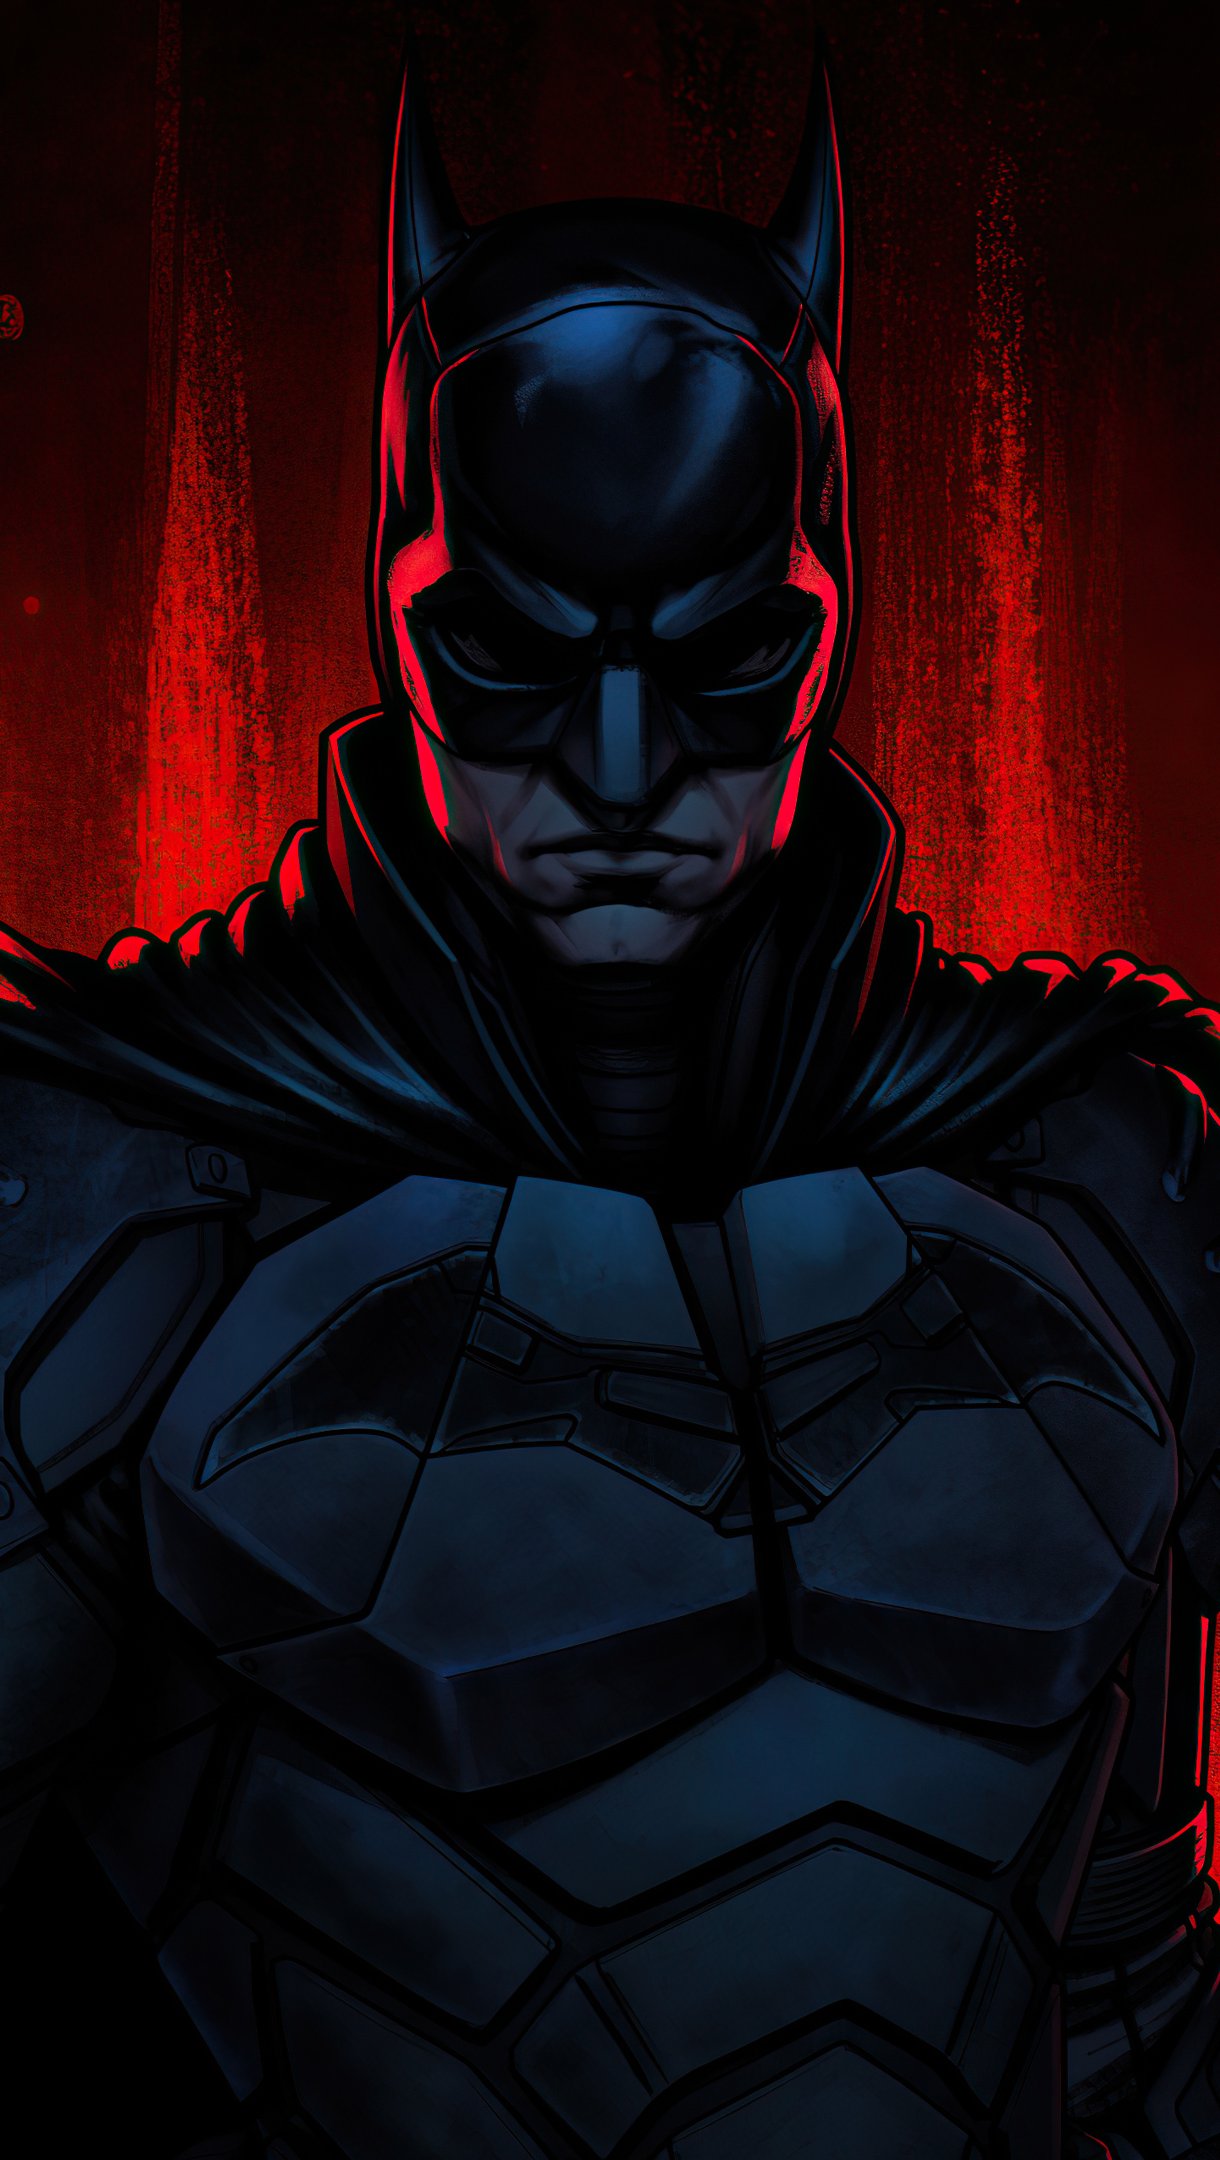 The Batman with red background Wallpaper 4k Ultra HD